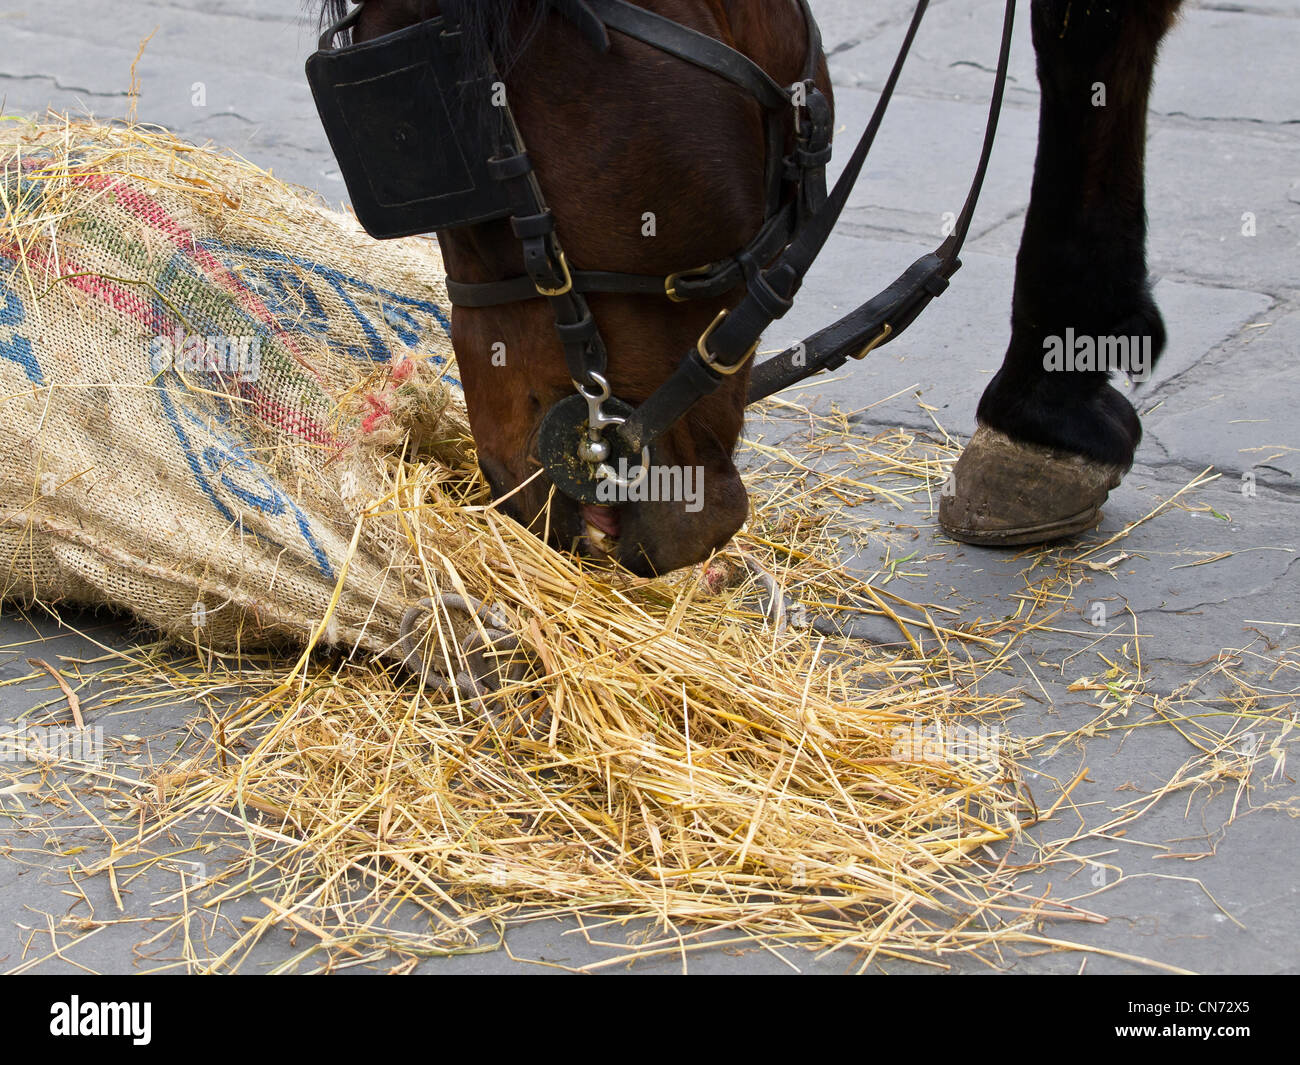 horse eating pasture from the bag on the street Stock Photo